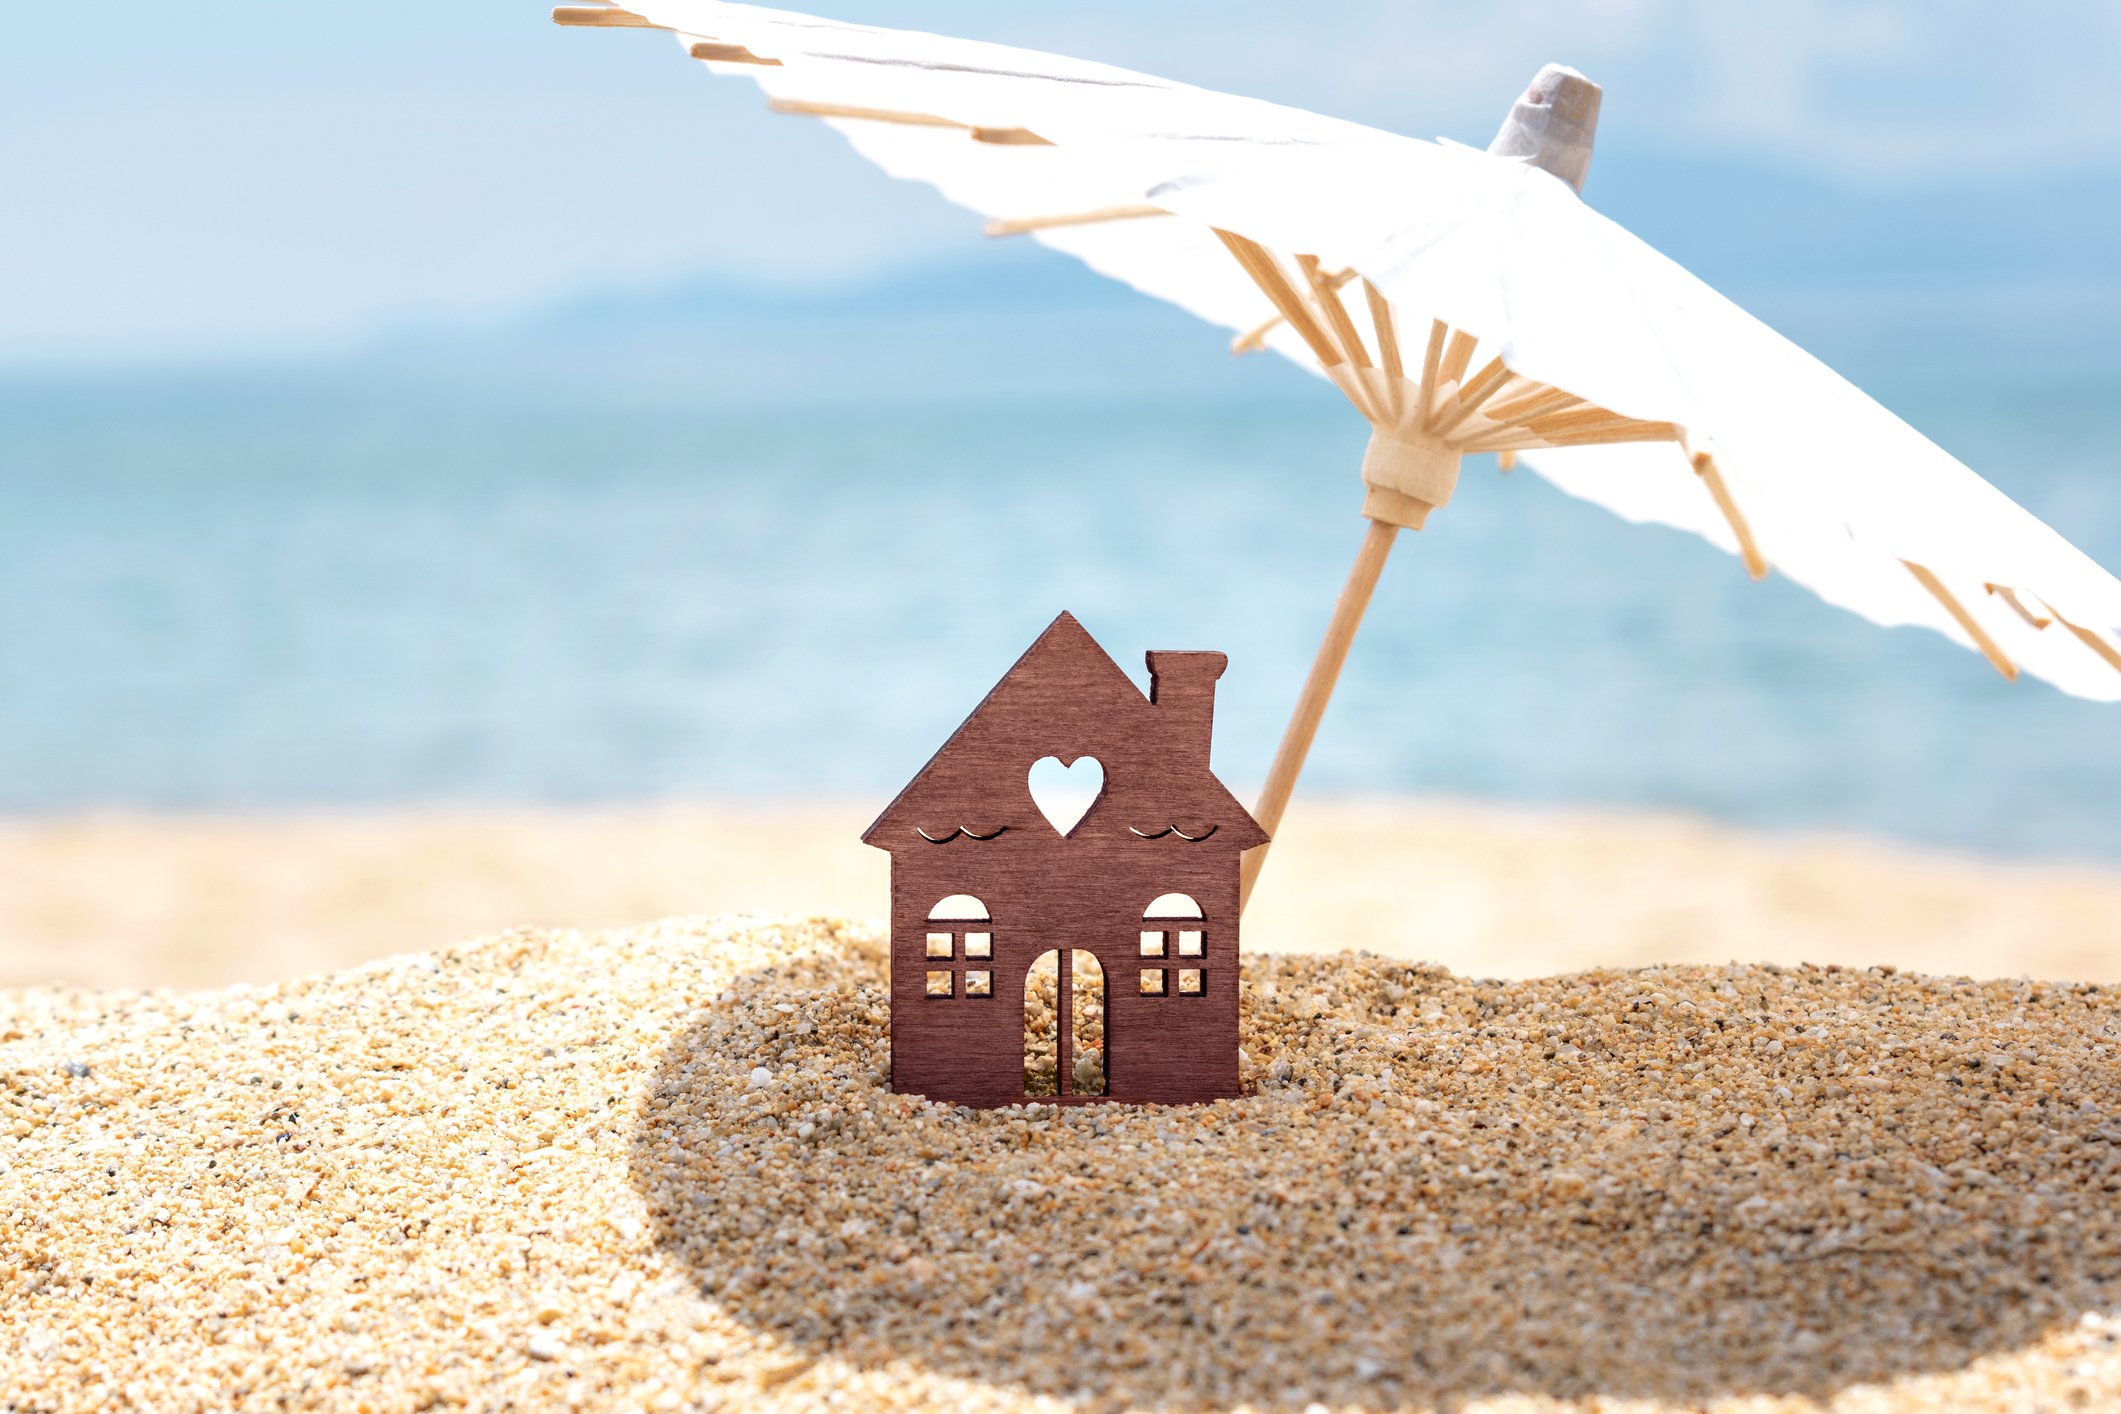 3 Things to Think About Before Buying a Vacation Home